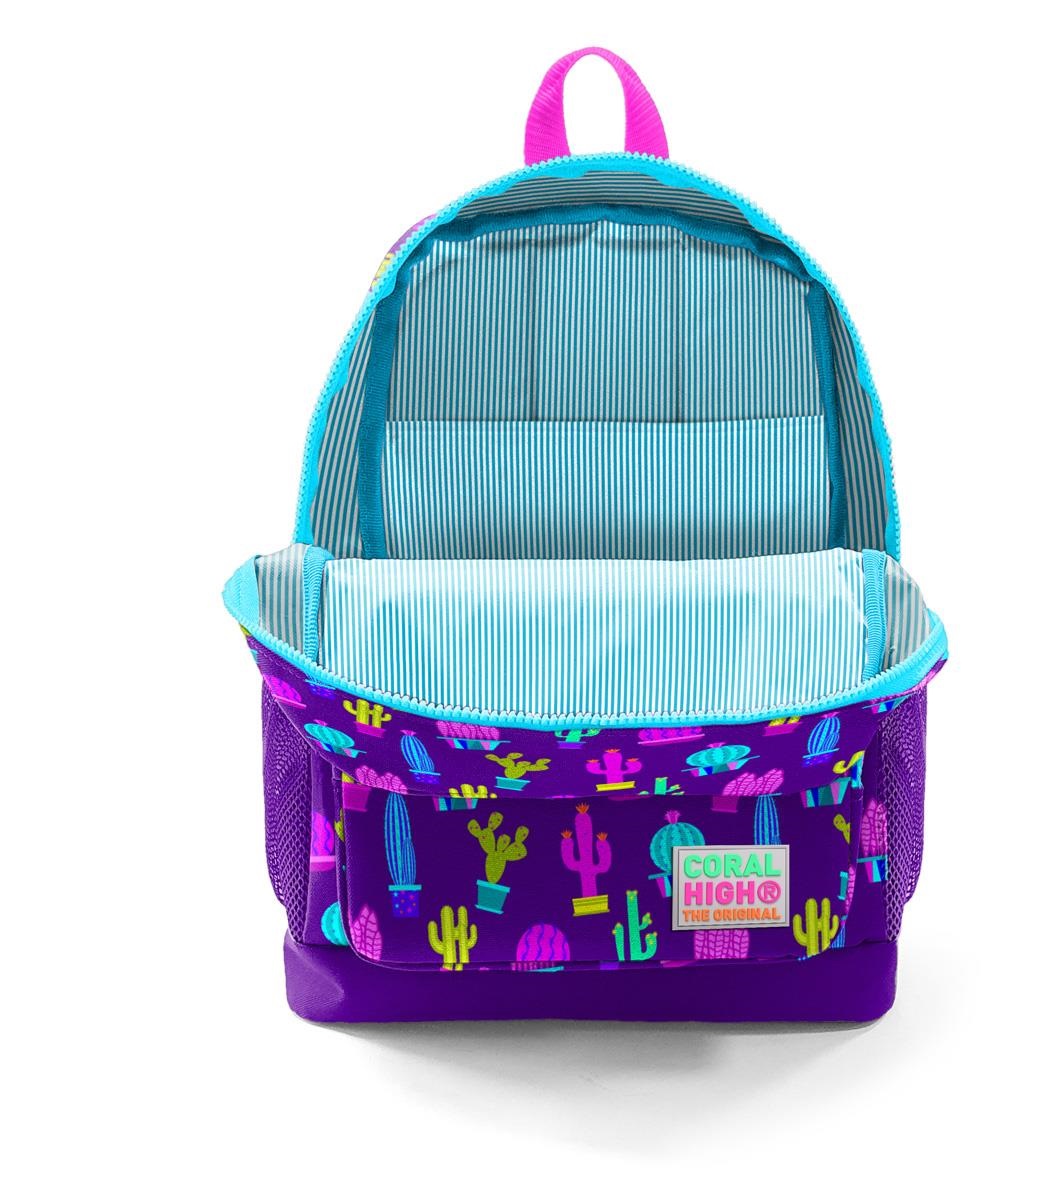 Coral High Kids Four Compartment School Backpack - Purple Pink Cactus Patterned